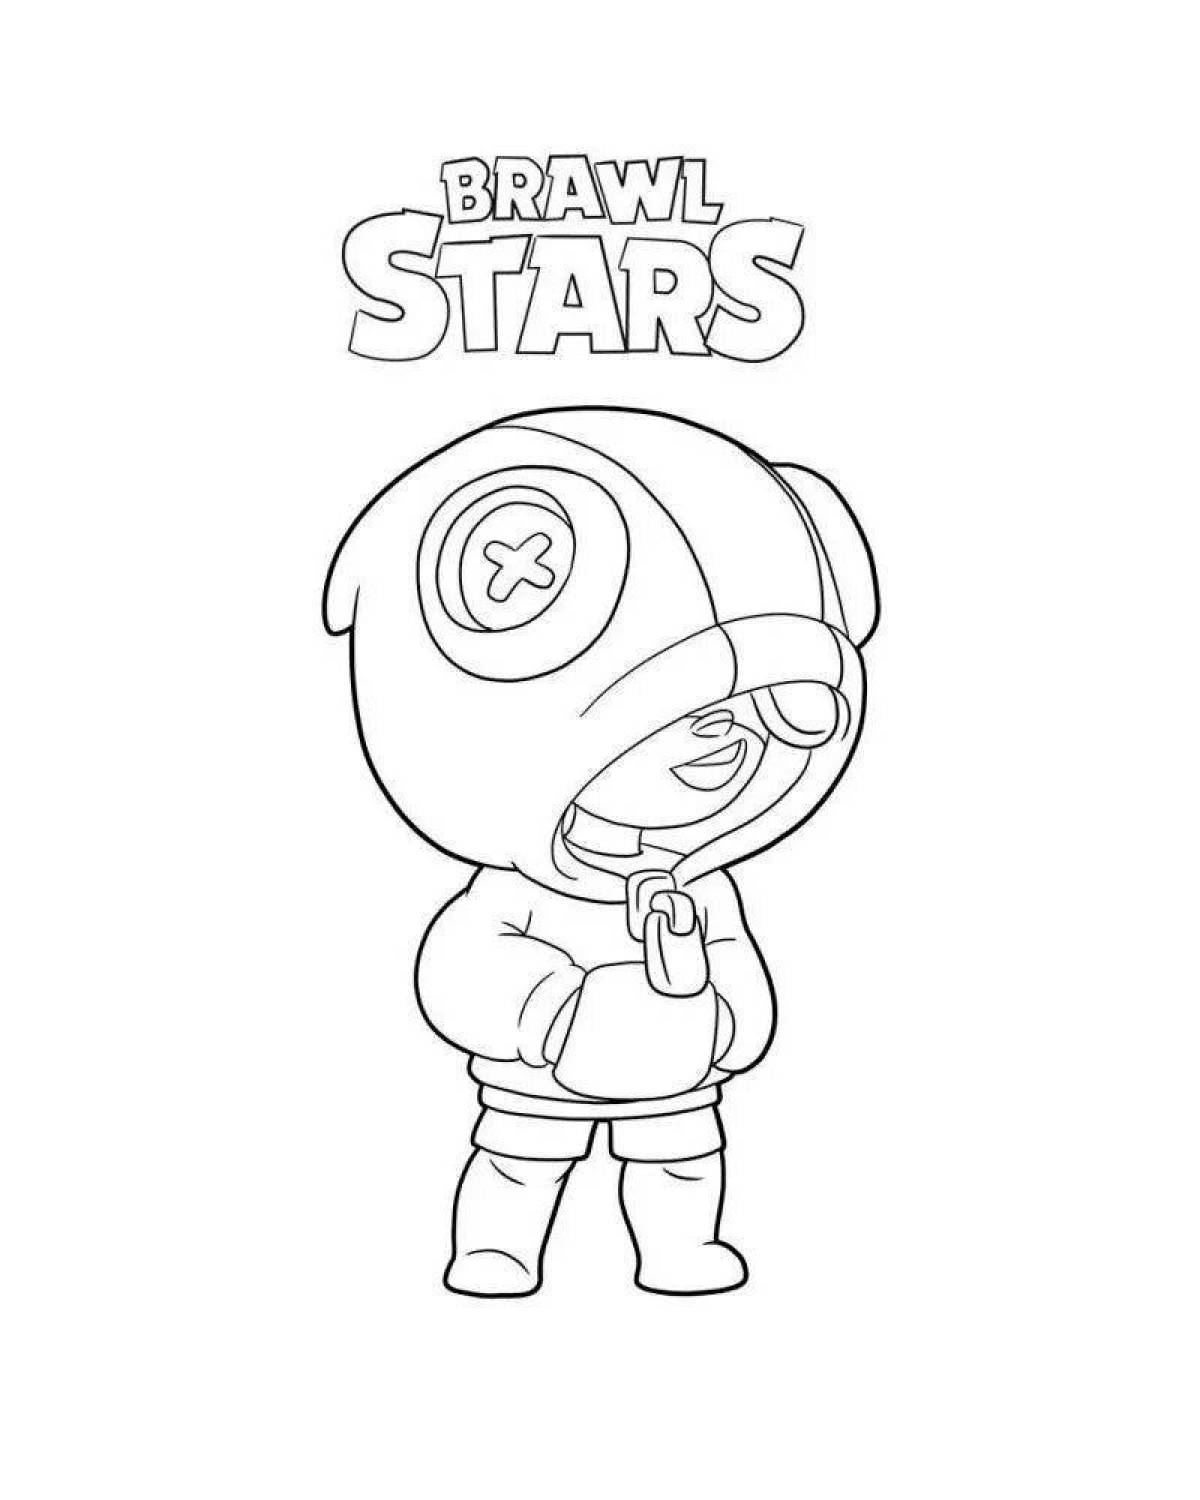 Bravo stars amazing coloring pages